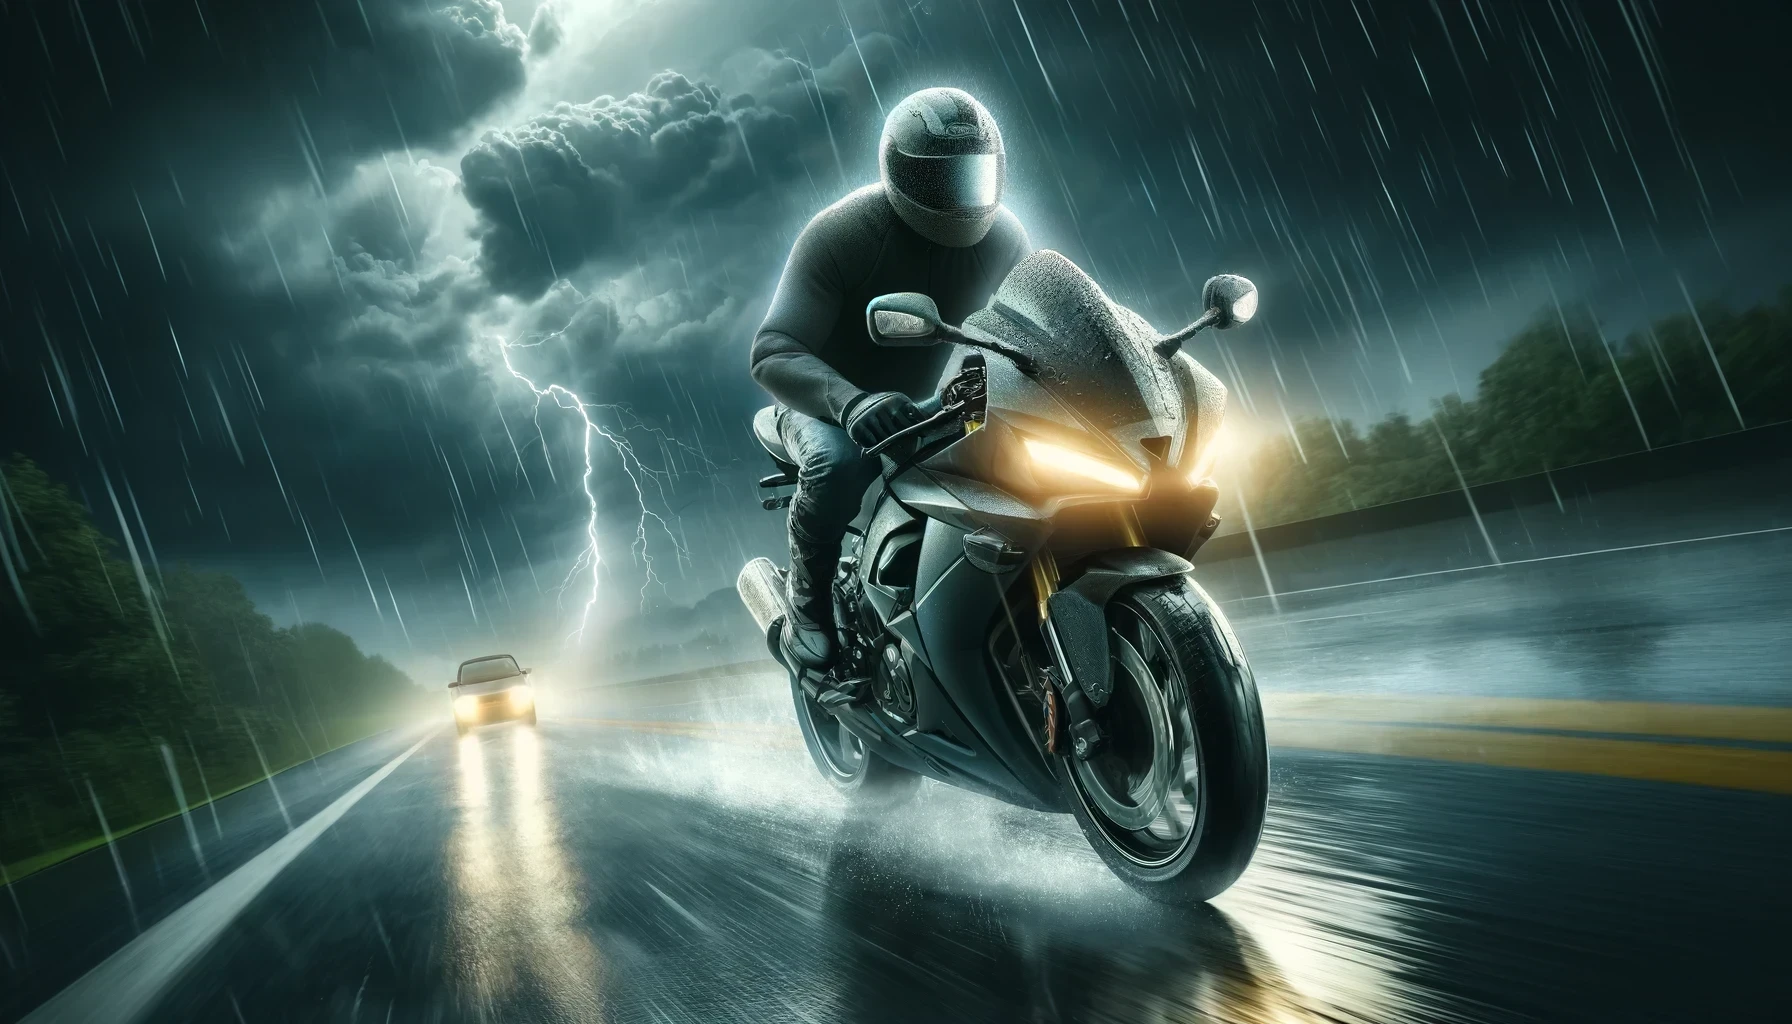 Motorcycle in Storm.